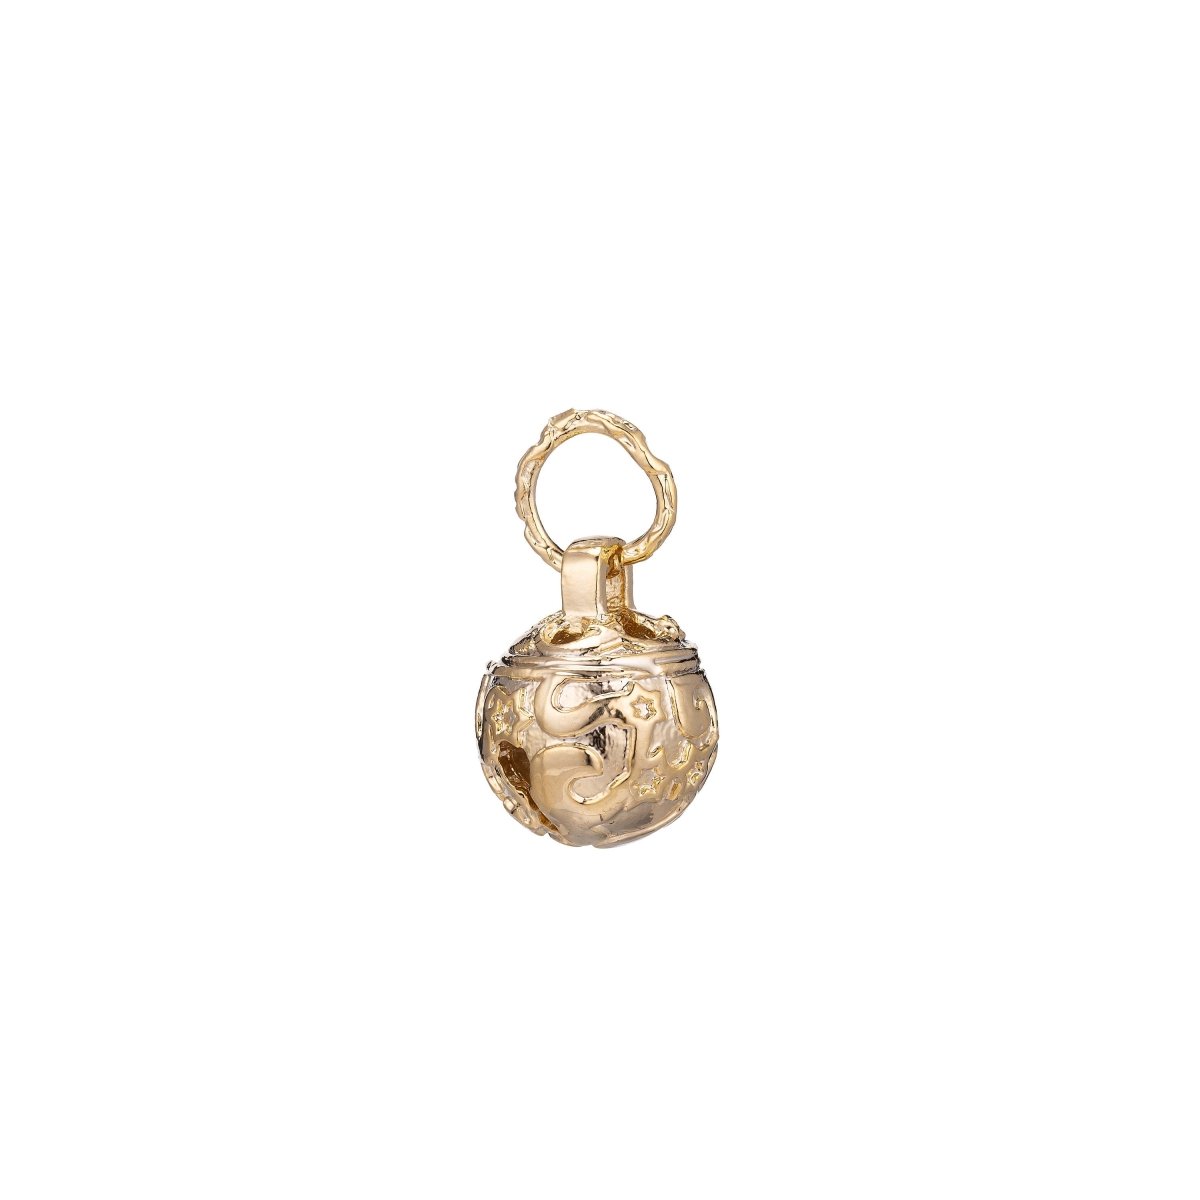 18k Gold Filled Jingle Bell Charms Round Cat Bell Charms Antique Gold Bell Pendant for Necklace Bracelet making " Can Jingle" for Supply E-451 E-576 E-577 - DLUXCA